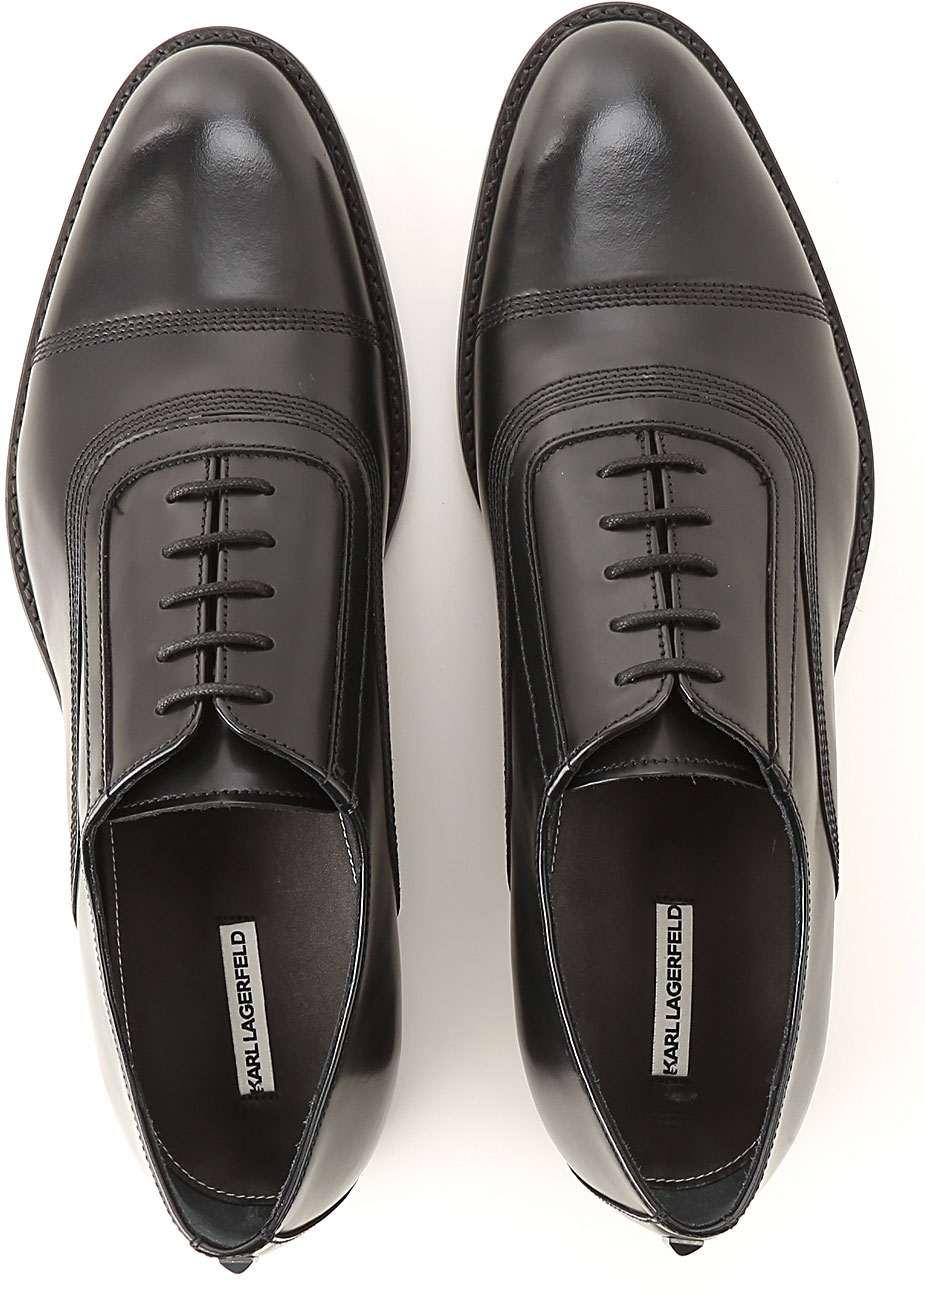 Mens Shoes Karl Lagerfeld, Style code: kl12210-000-